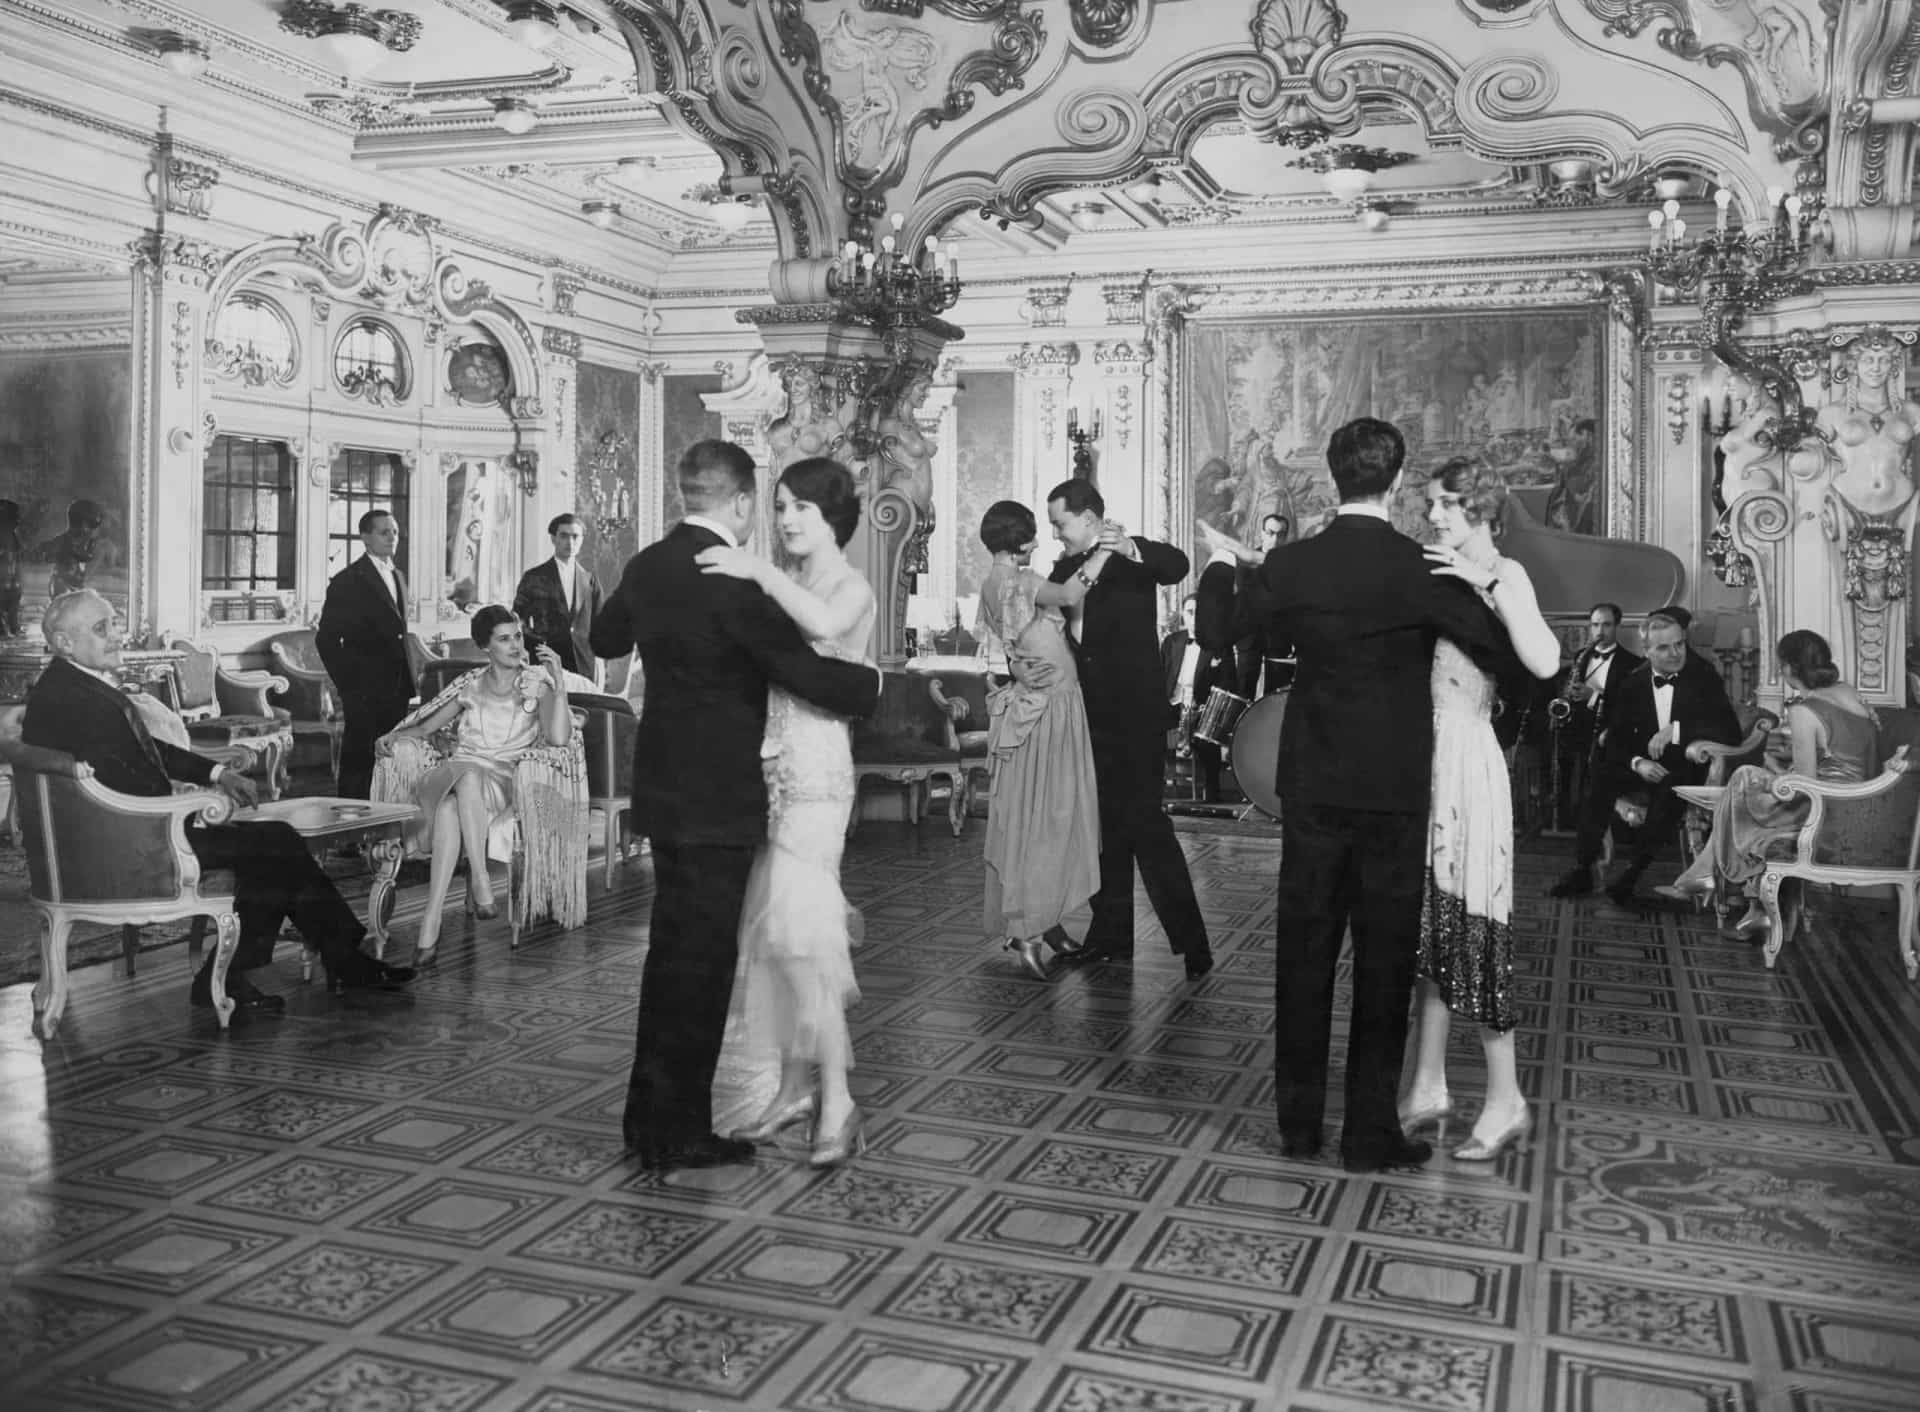 <p>Gilt-edged ballrooms catered to those wishing to dance away the night. For the more sporty, the first top deck swimming pools made their debut around the same time.</p><p><a href="https://www.msn.com/en-za/community/channel/vid-7xx8mnucu55yw63we9va2gwr7uihbxwc68fxqp25x6tg4ftibpra?cvid=94631541bc0f4f89bfd59158d696ad7e">Follow us and access great exclusive content every day</a></p>